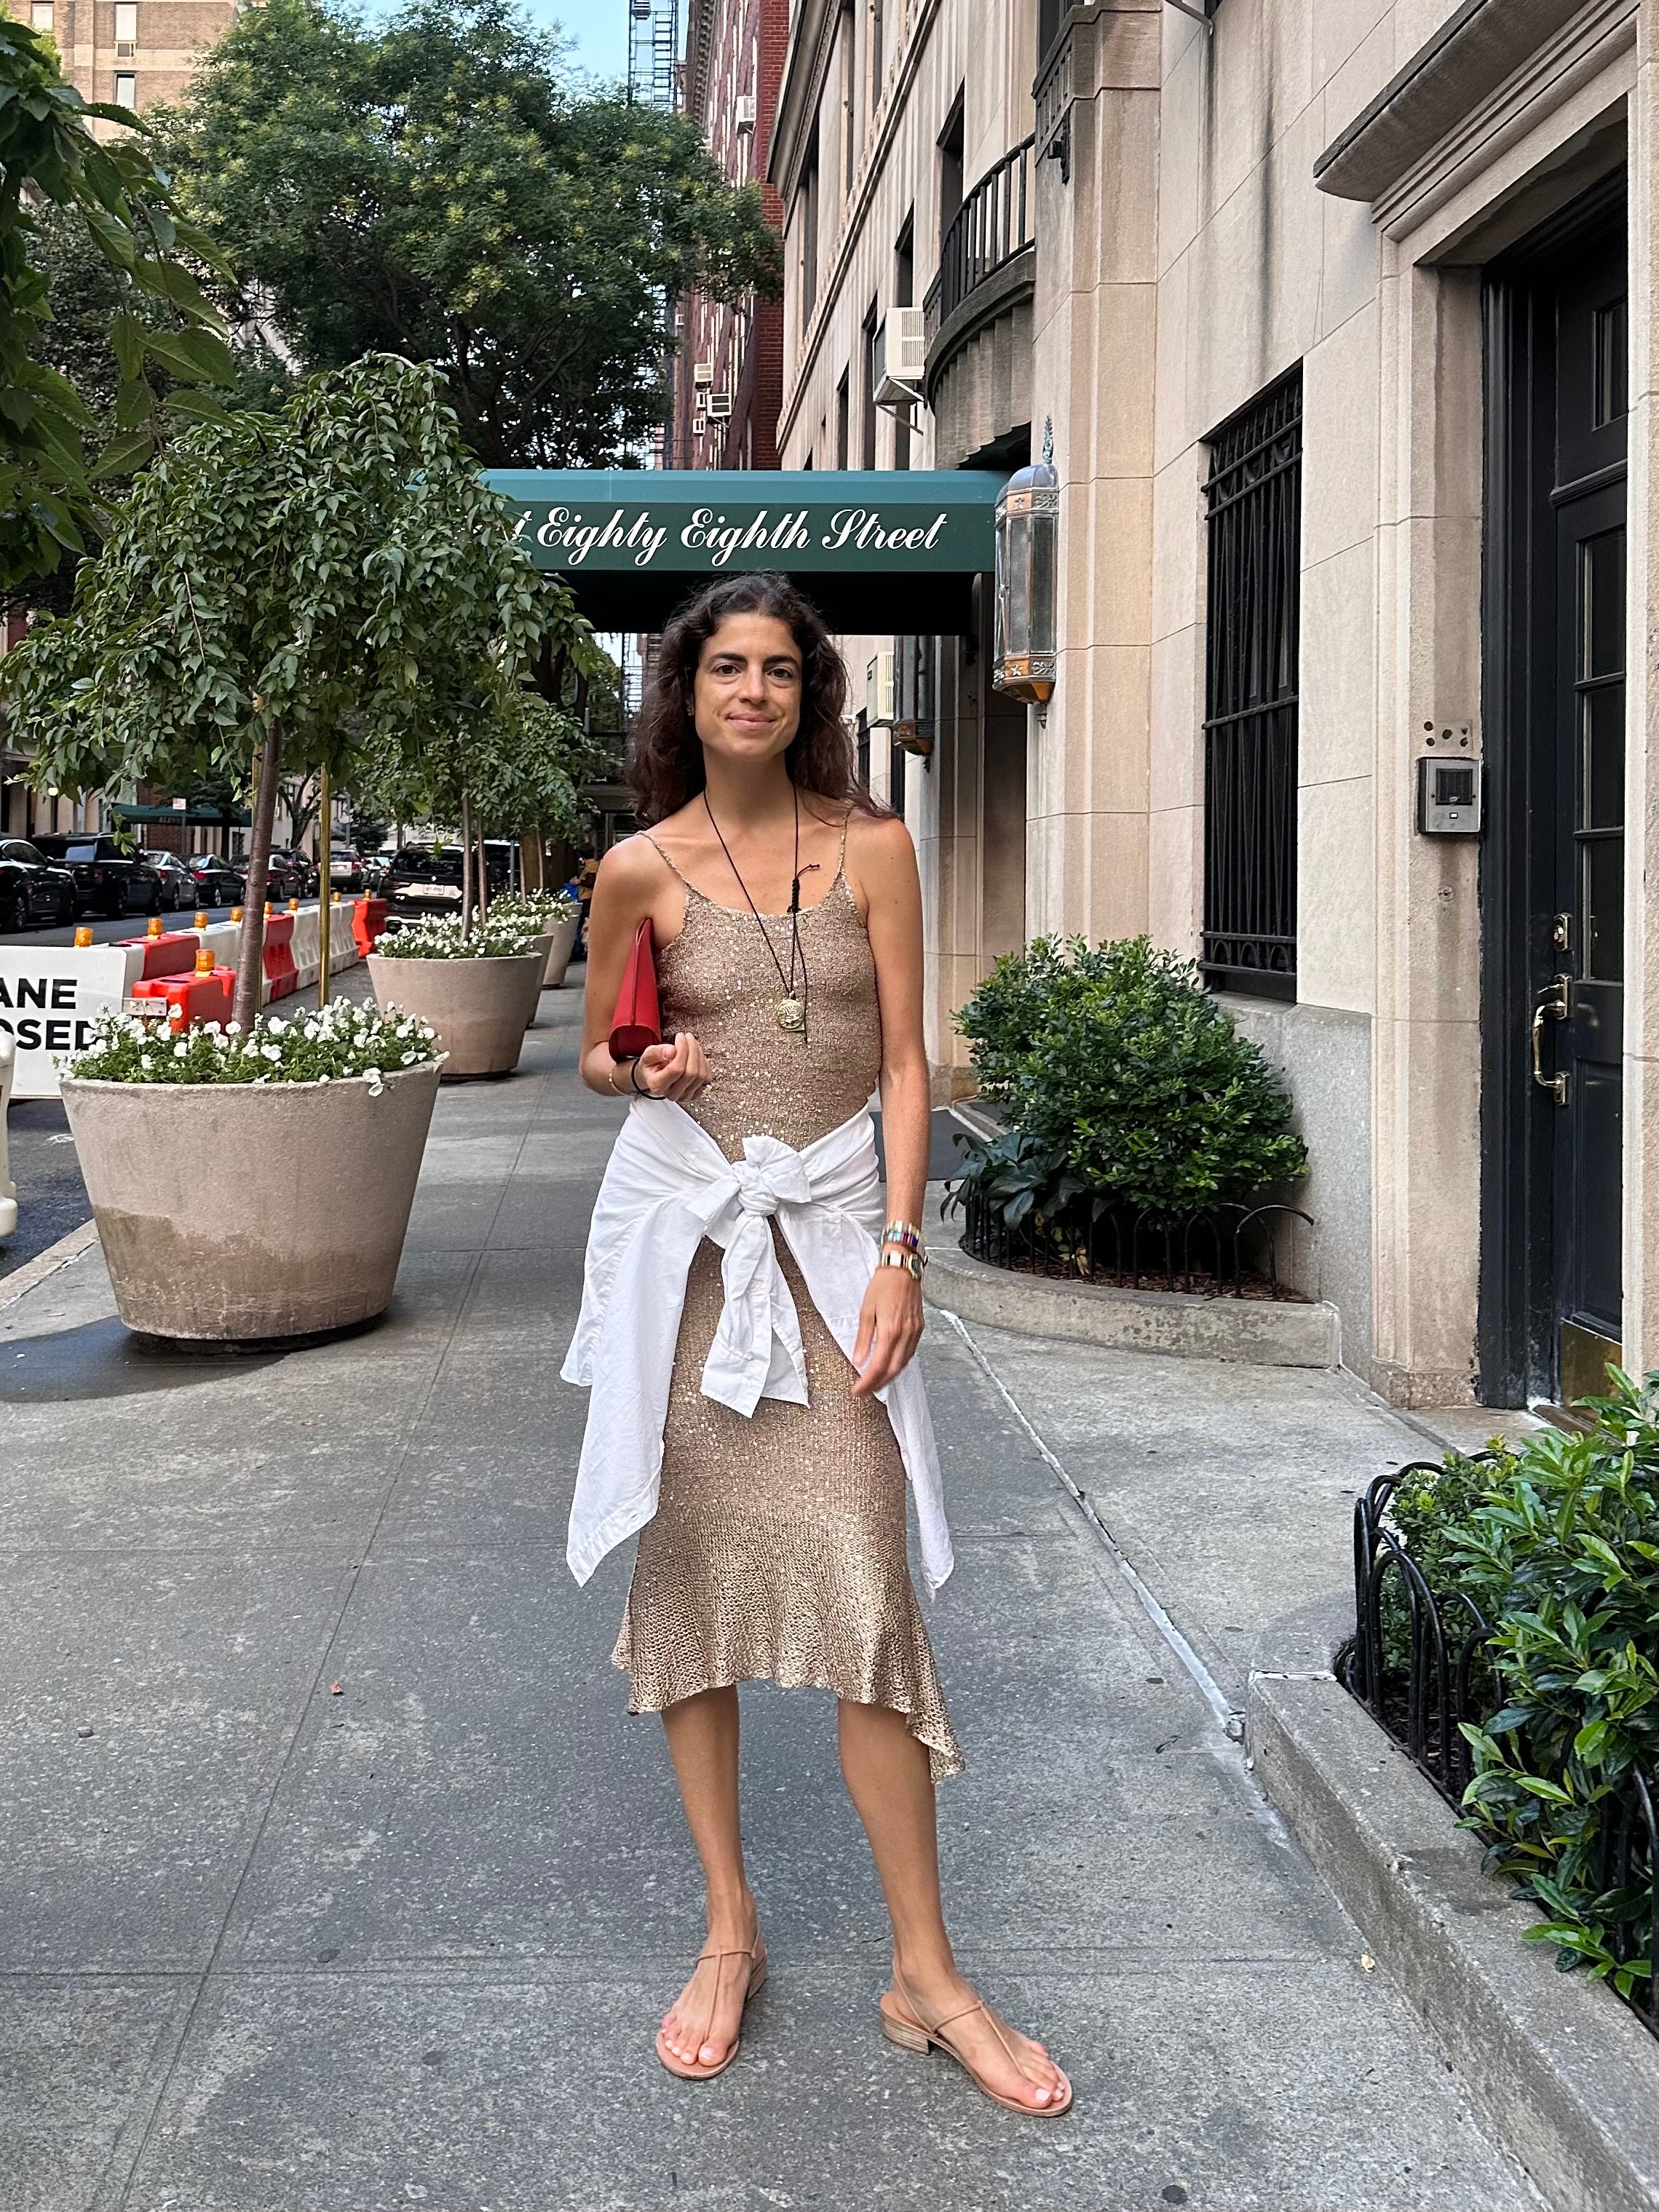 Great summer dresses and how to wear them – Cafe Leandra